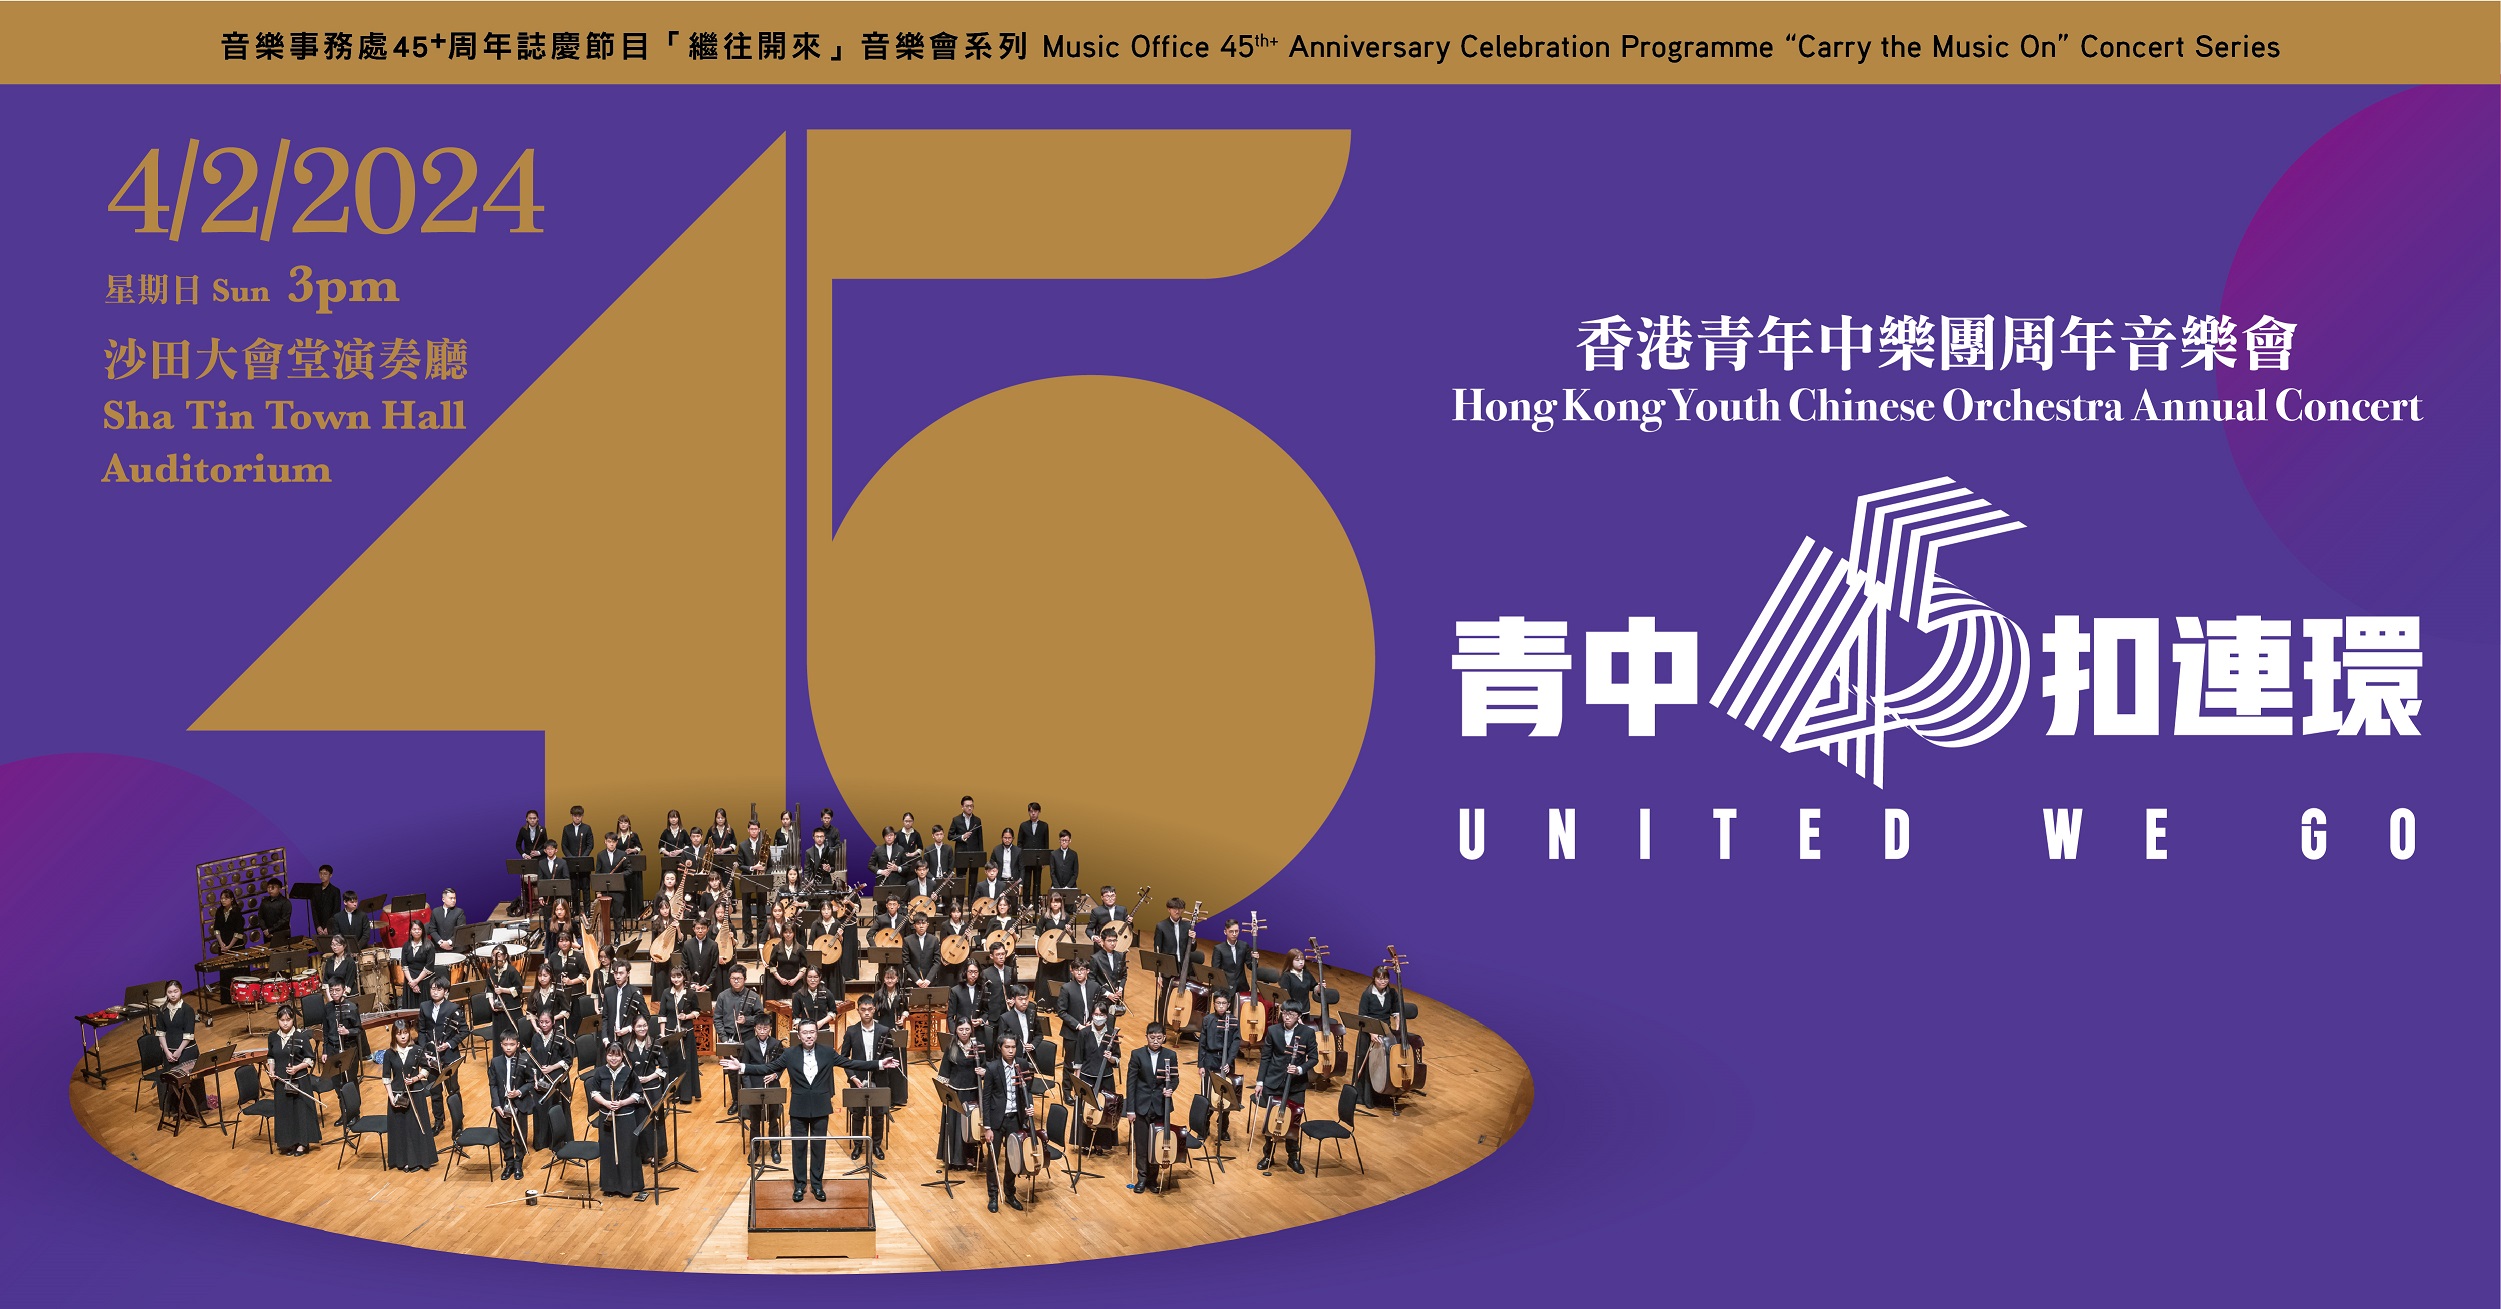 2024 Hong Kong Youth Chinese Orchestra Annual Concert “United We Go” (Completed)